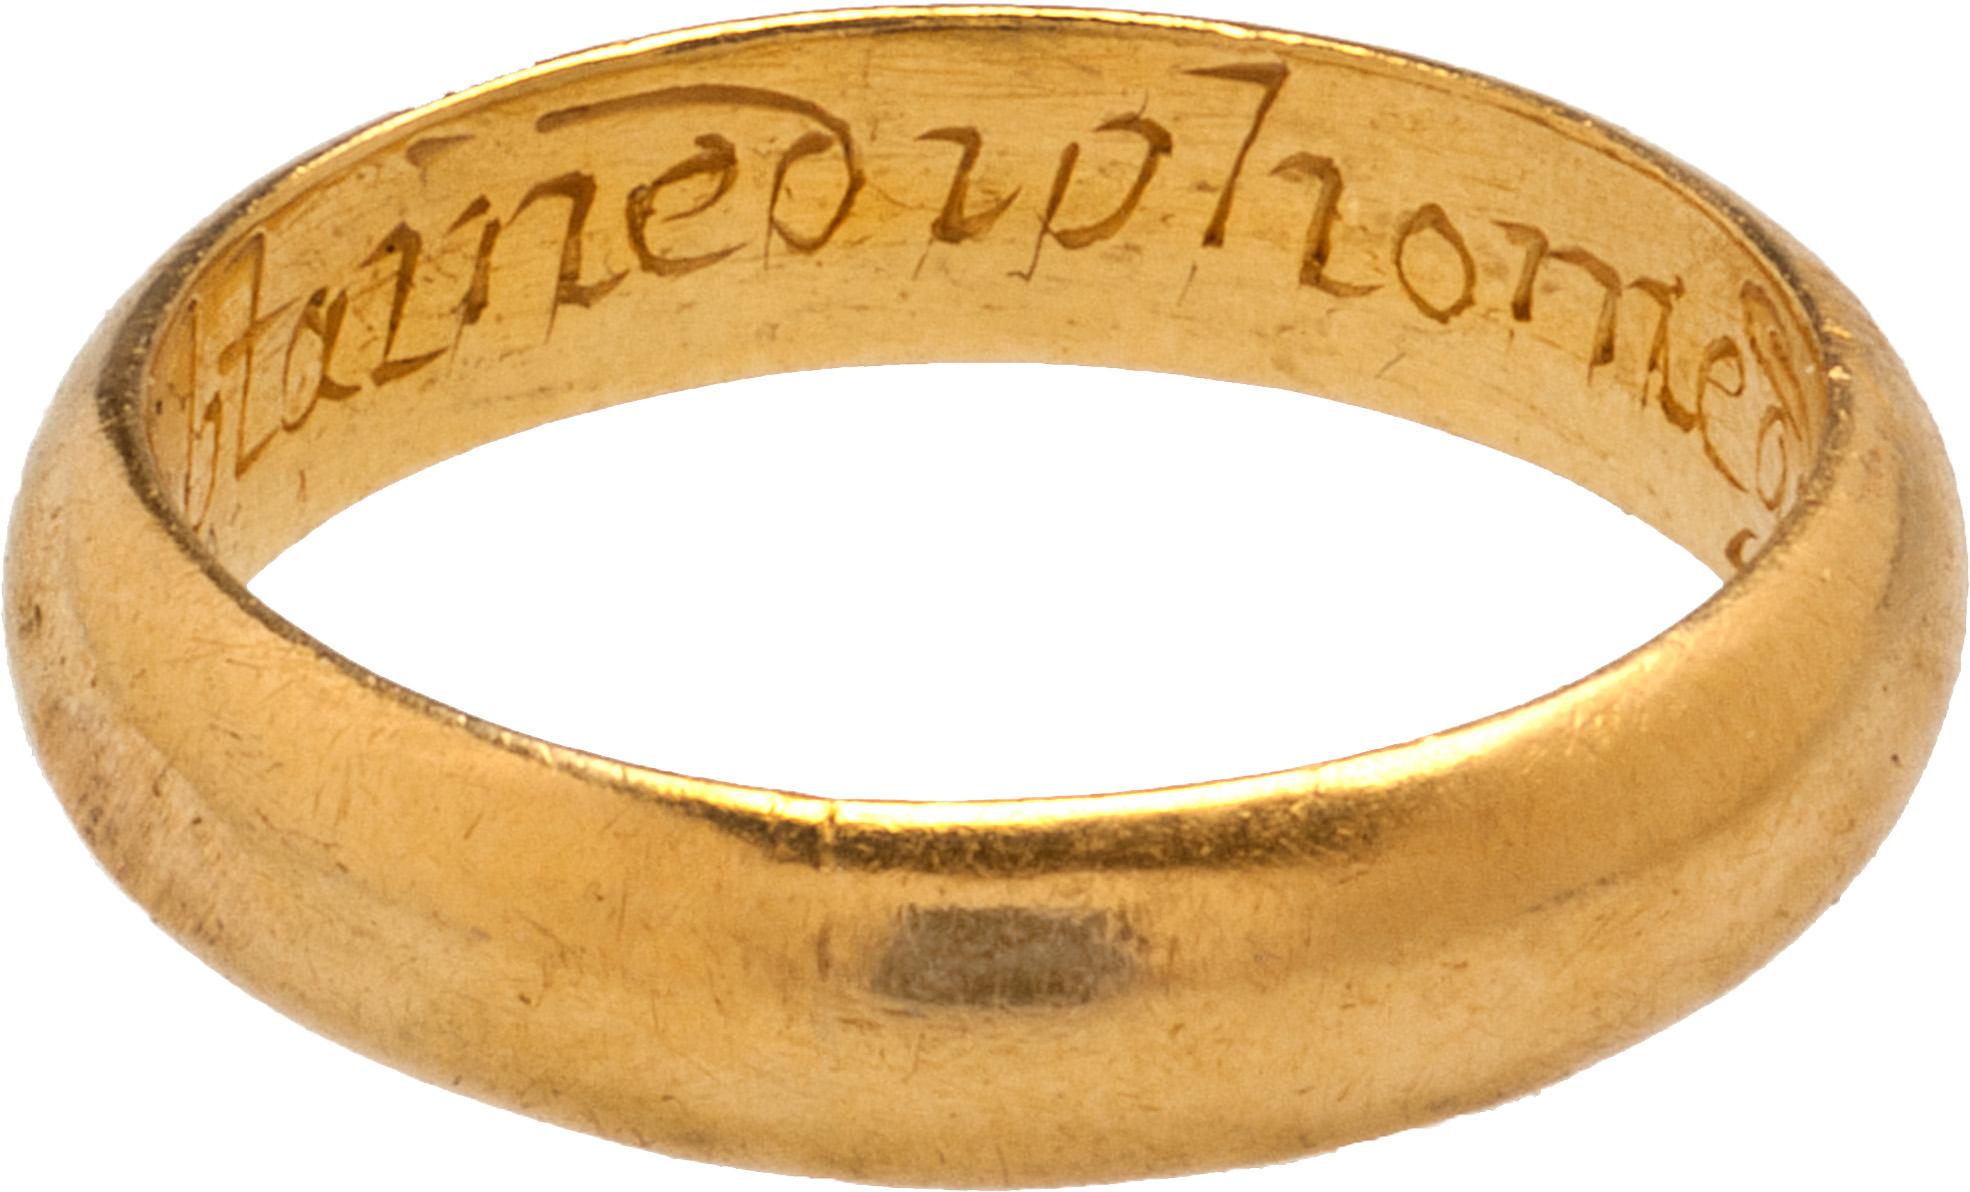 POSY RING “I HAVE OBTAINED WHOME GOD ORDAIND”
England, 17th century
Gold
Circumference 58 mm.; weight 7.9 gr.; US size 8/8 ½ ; UK size Q ½

The plain hoop, flat on the interior and rounded on the exterior, is substantial. It is engraved on the